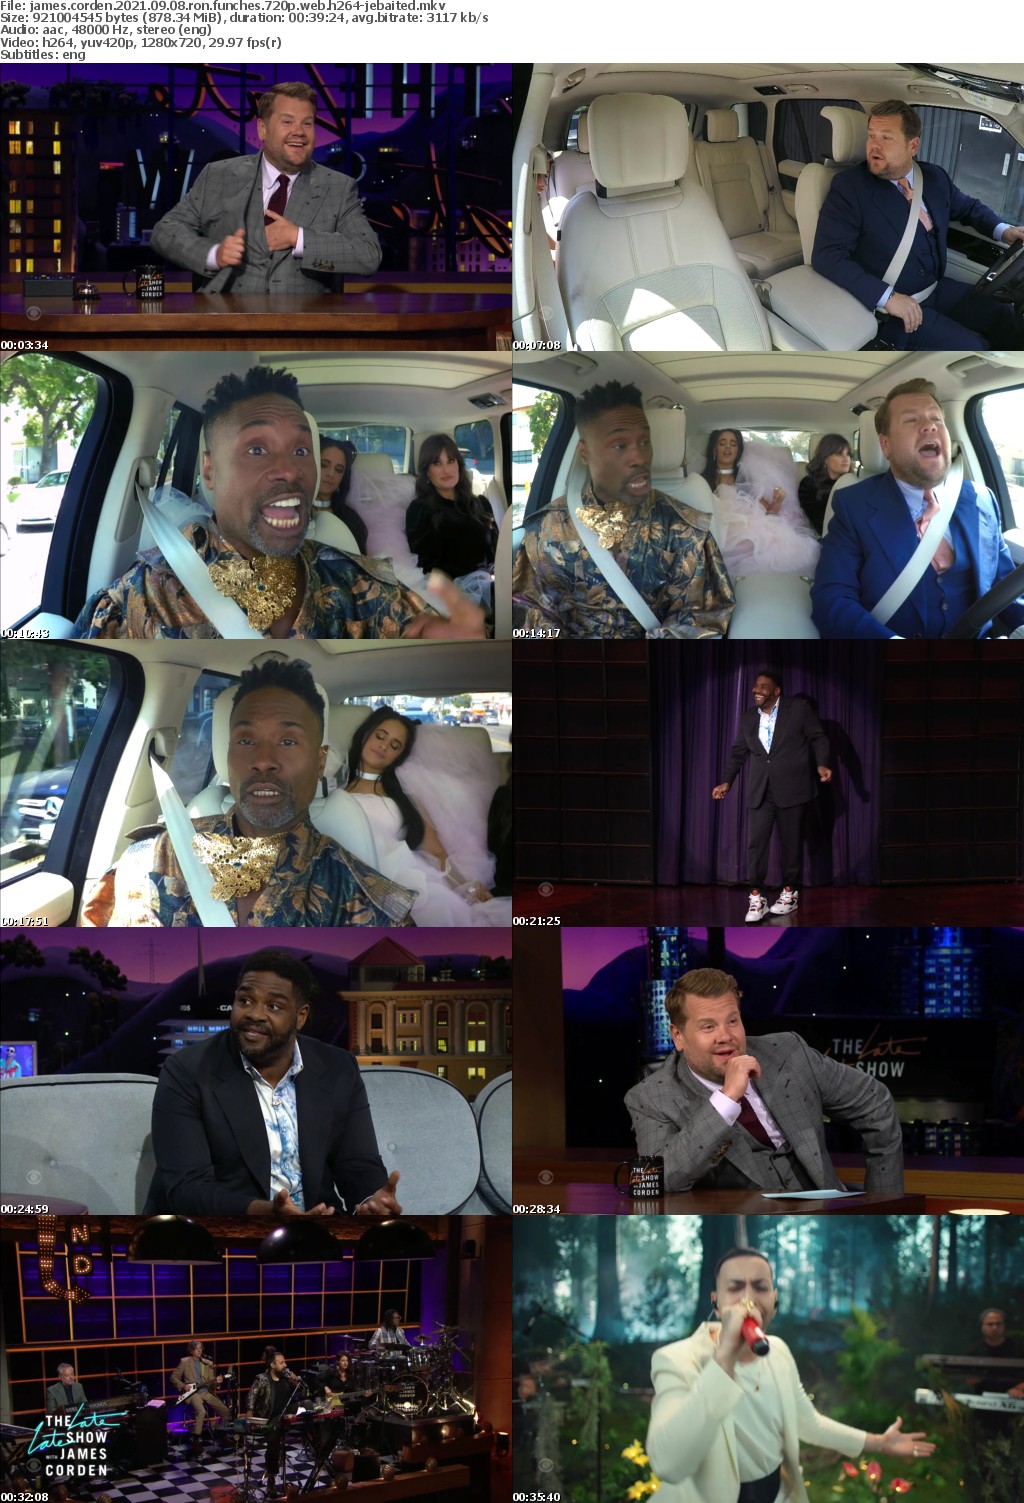 James Corden 2021 09 08 Ron Funches 720p WEB H264-JEBAITED